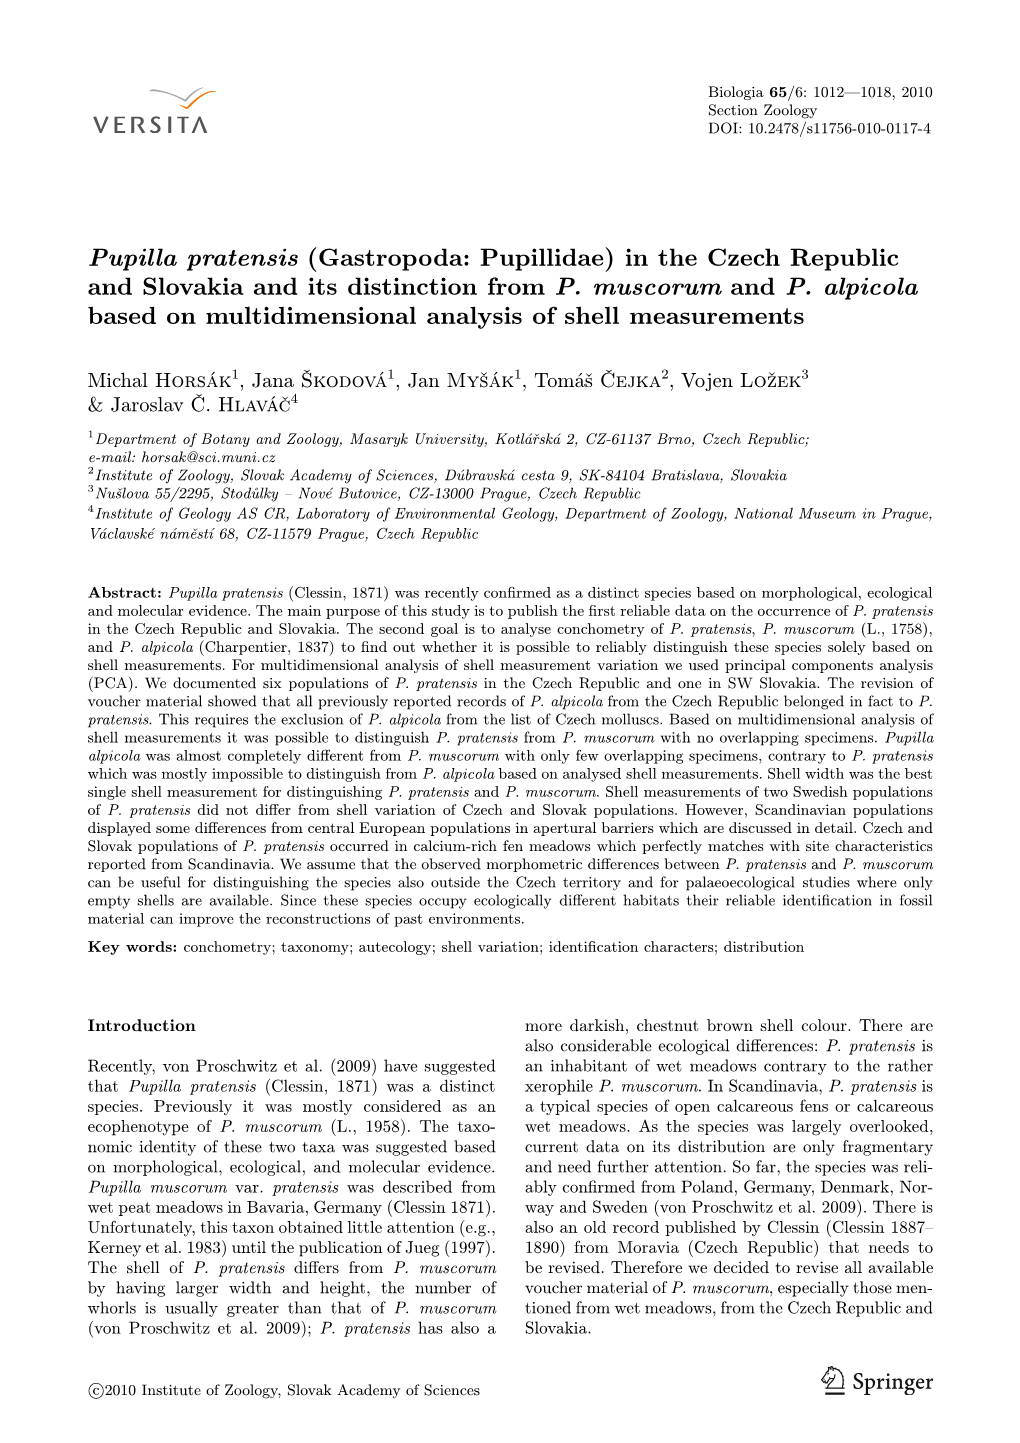 Pupilla Pratensis (Gastropoda: Pupillidae) in the Czech Republic and Slovakia and Its Distinction from P